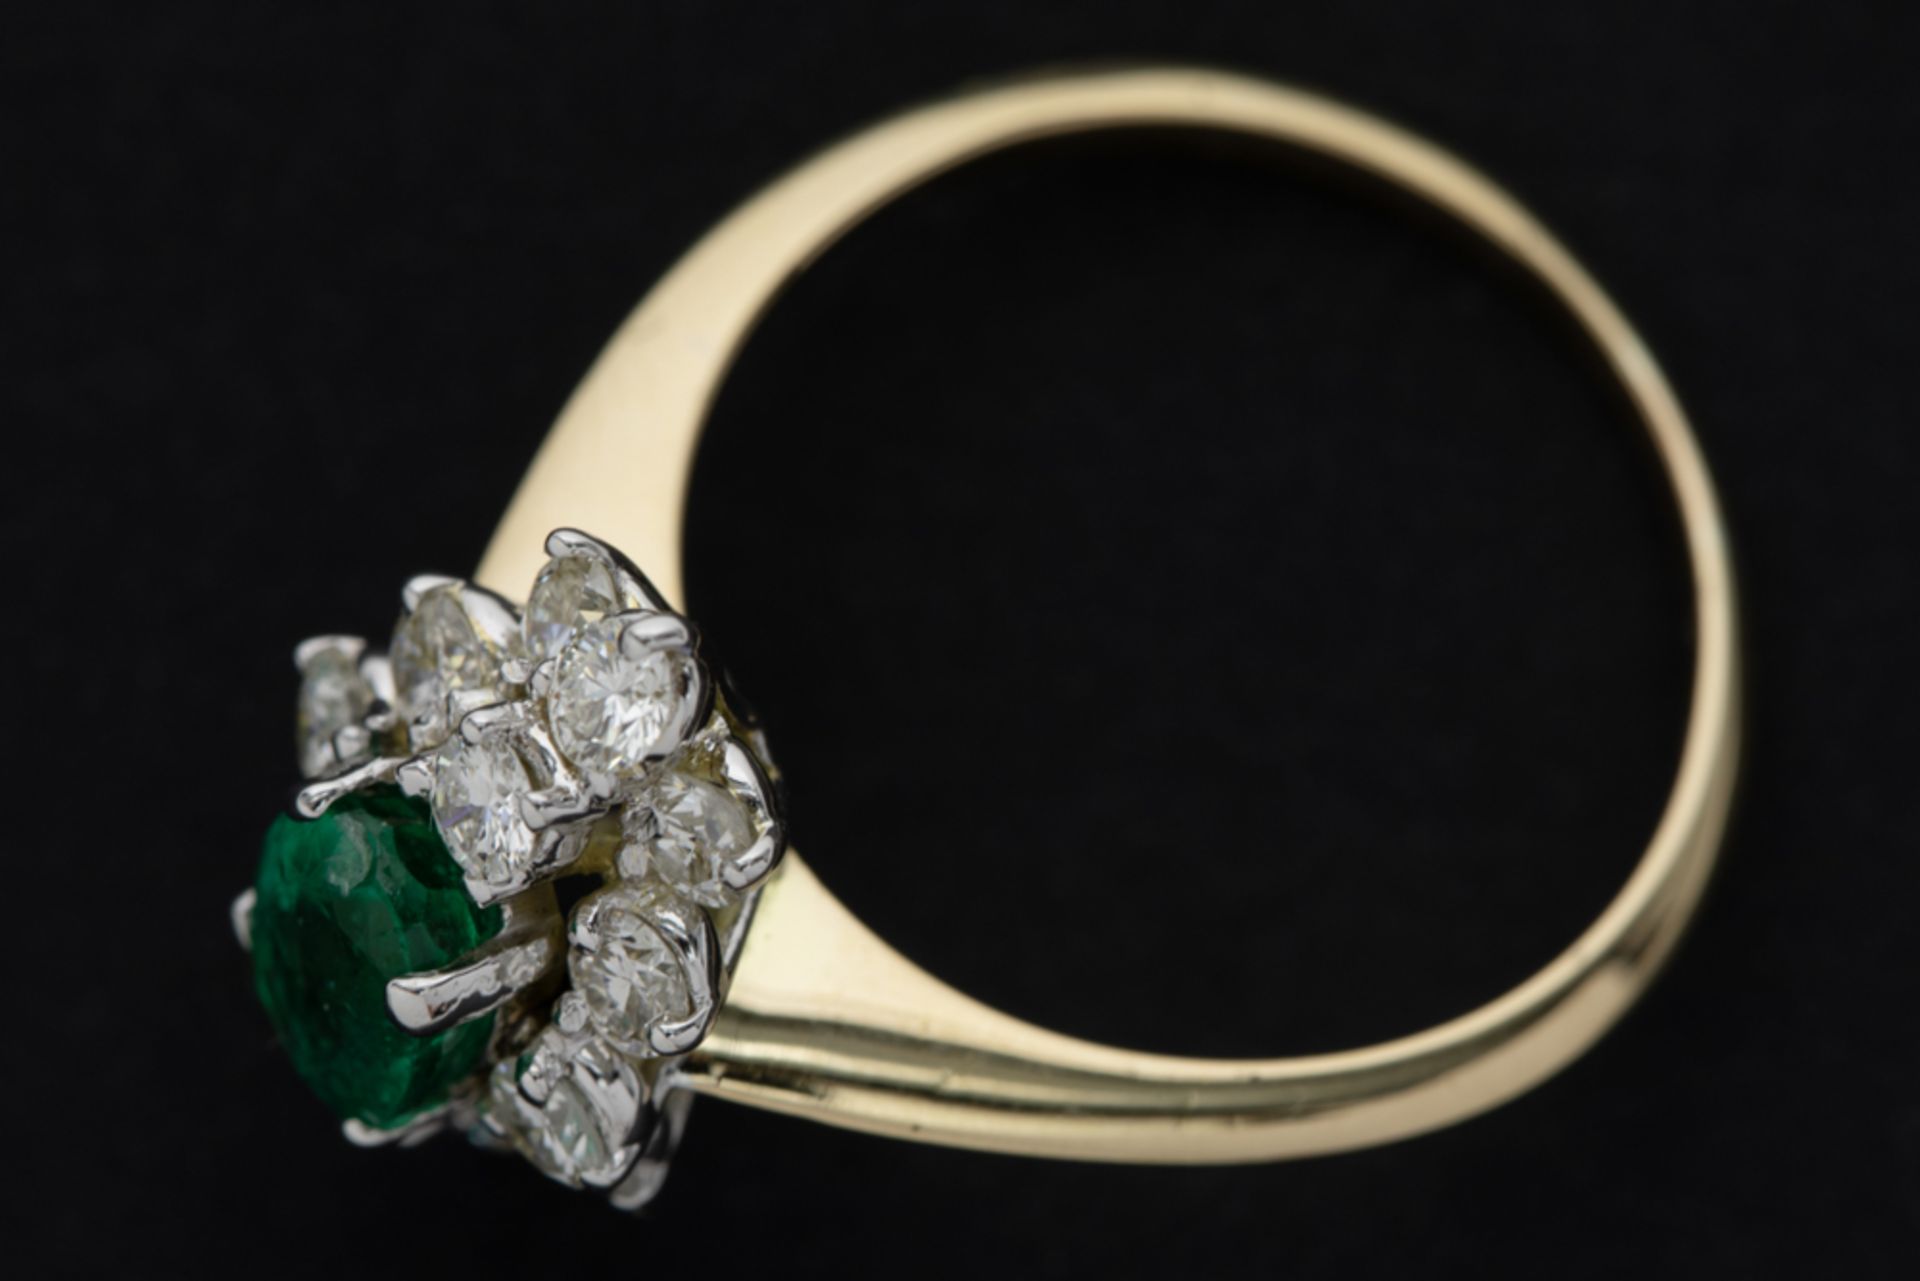 seventies' cocktail ring in yellow and white gold (18 carat) with a more then 1 carat oval emerald - Bild 2 aus 2